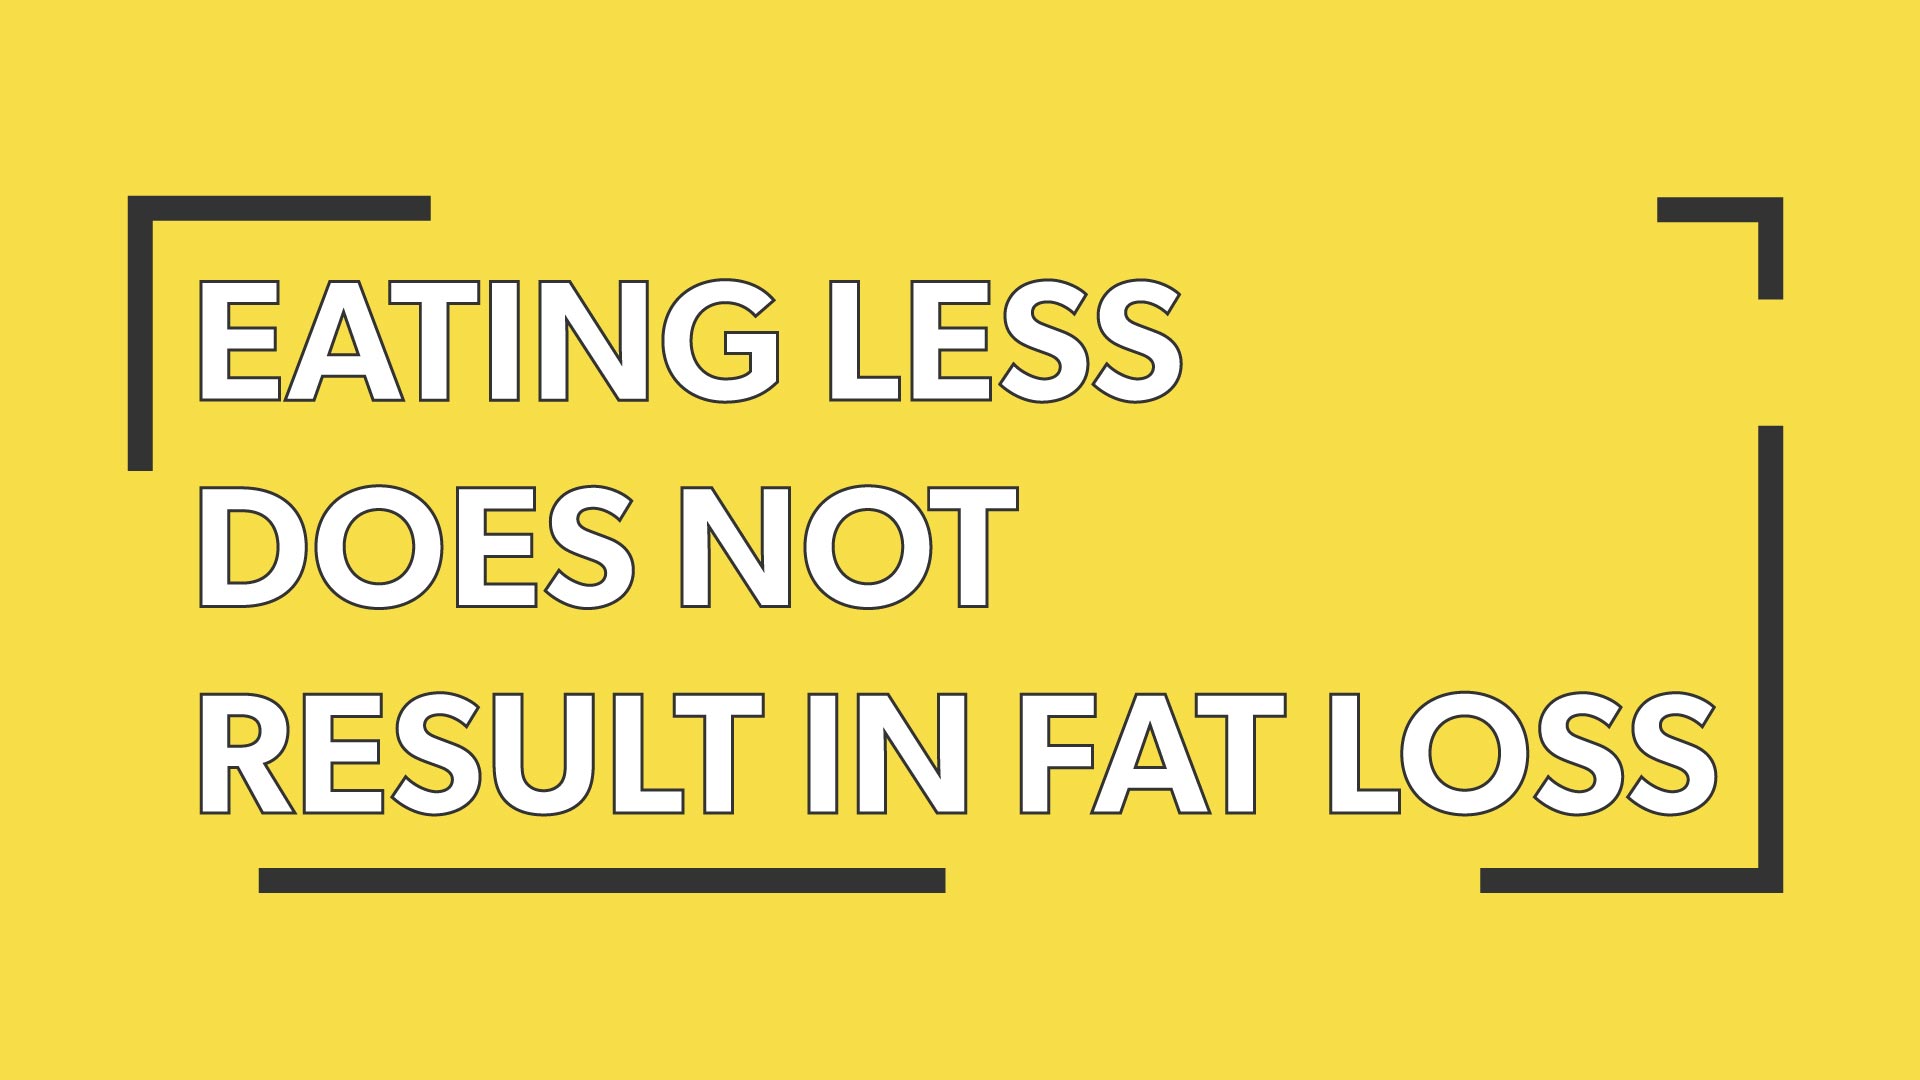 fast-fit-eating-less-does-not-result-in-fat-loss-body-sculpting-weight-loss-diet